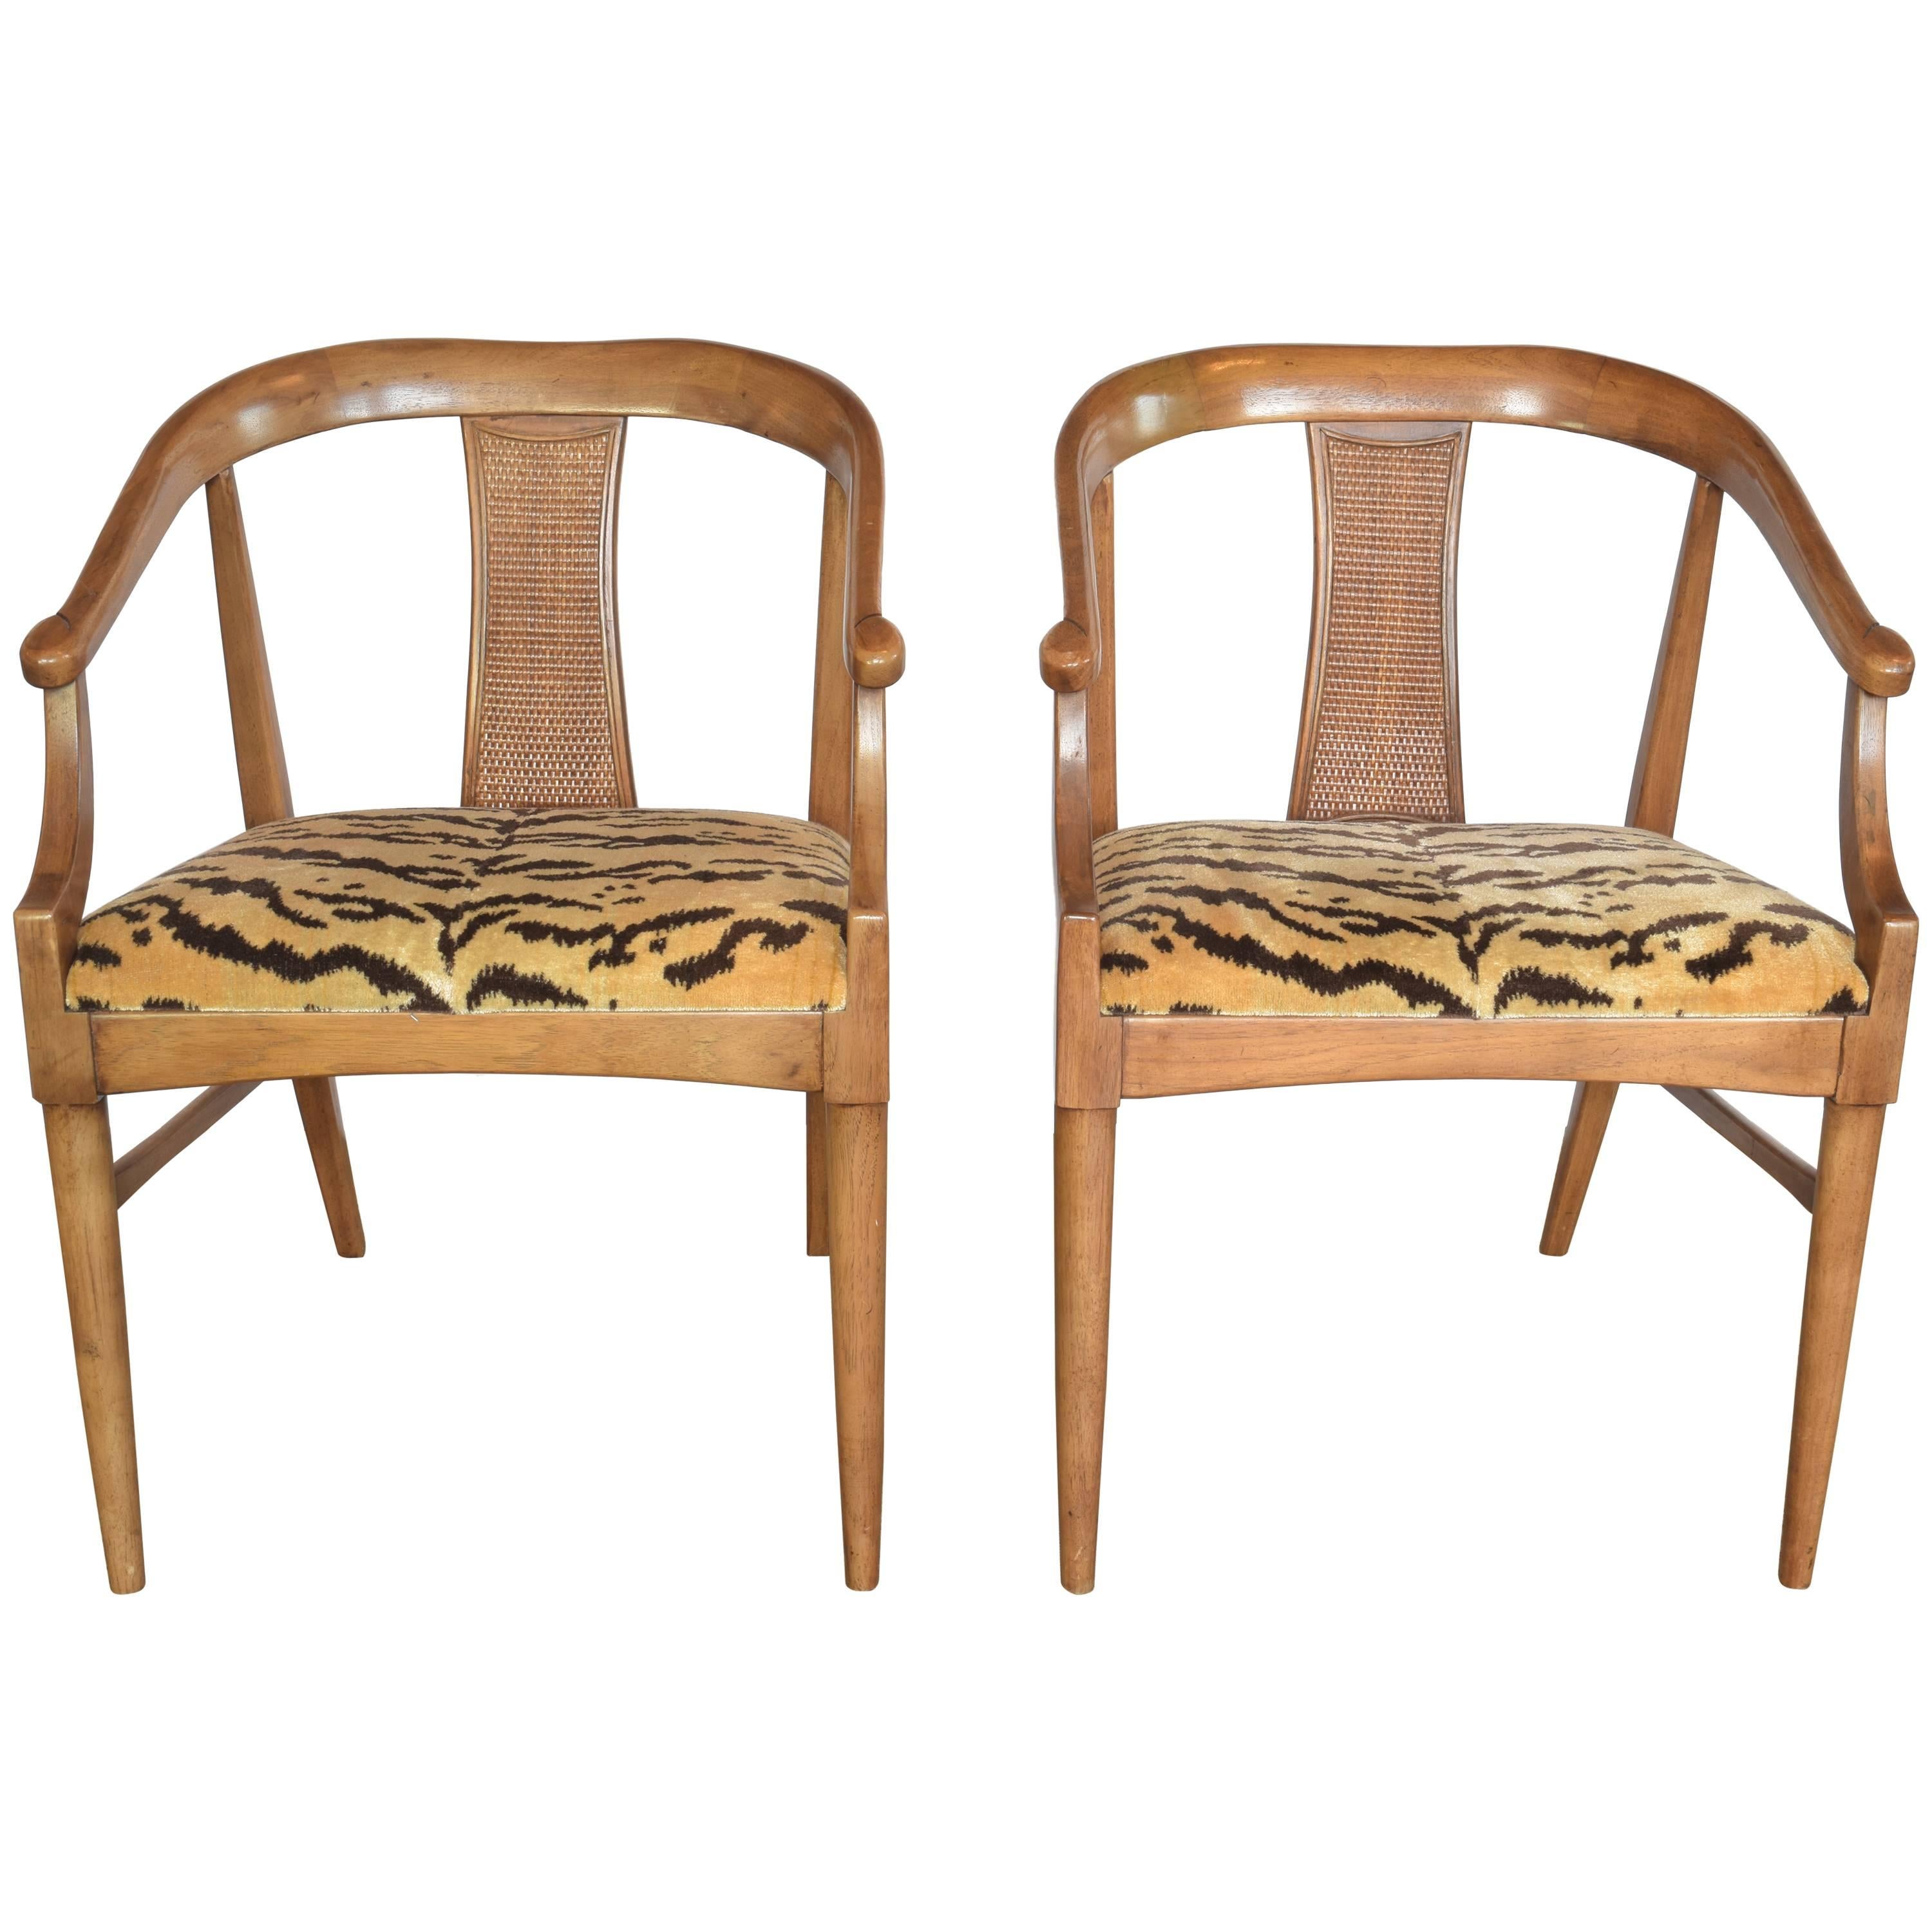 Pair of Midcentury Chairs by Lane For Sale